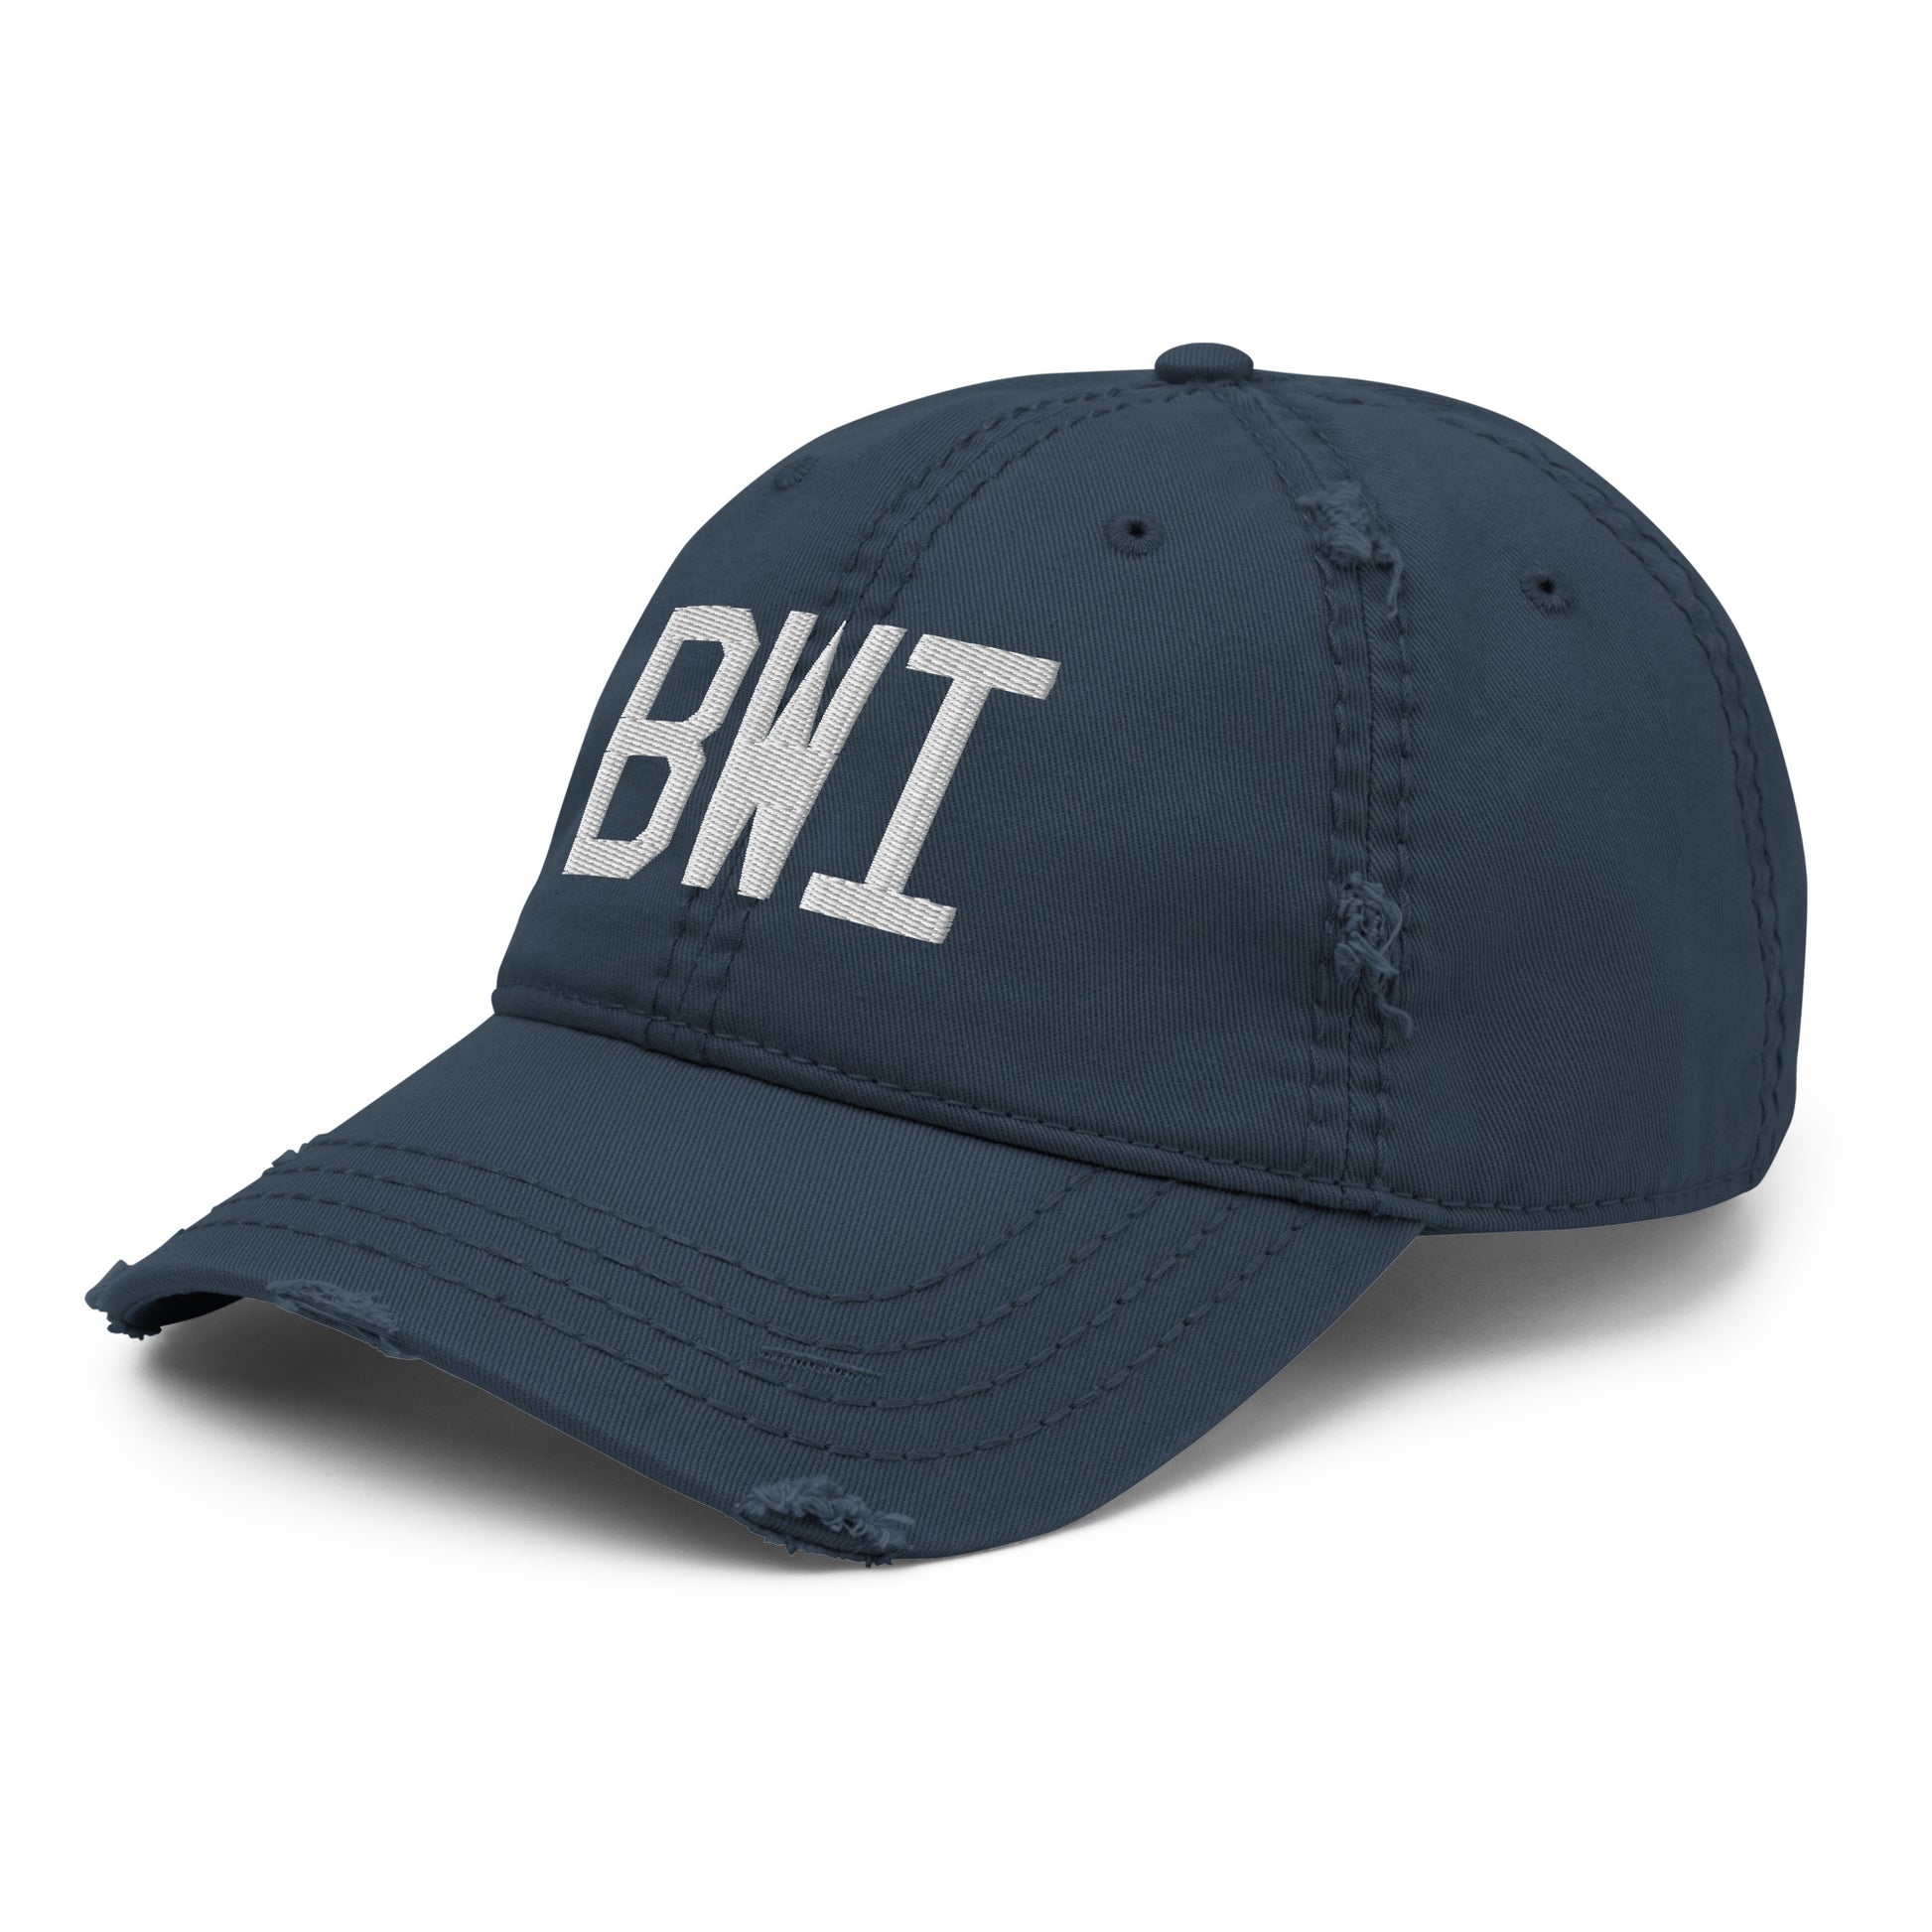 Airport Code Distressed Hat - White • BWI Baltimore • YHM Designs - Image 01